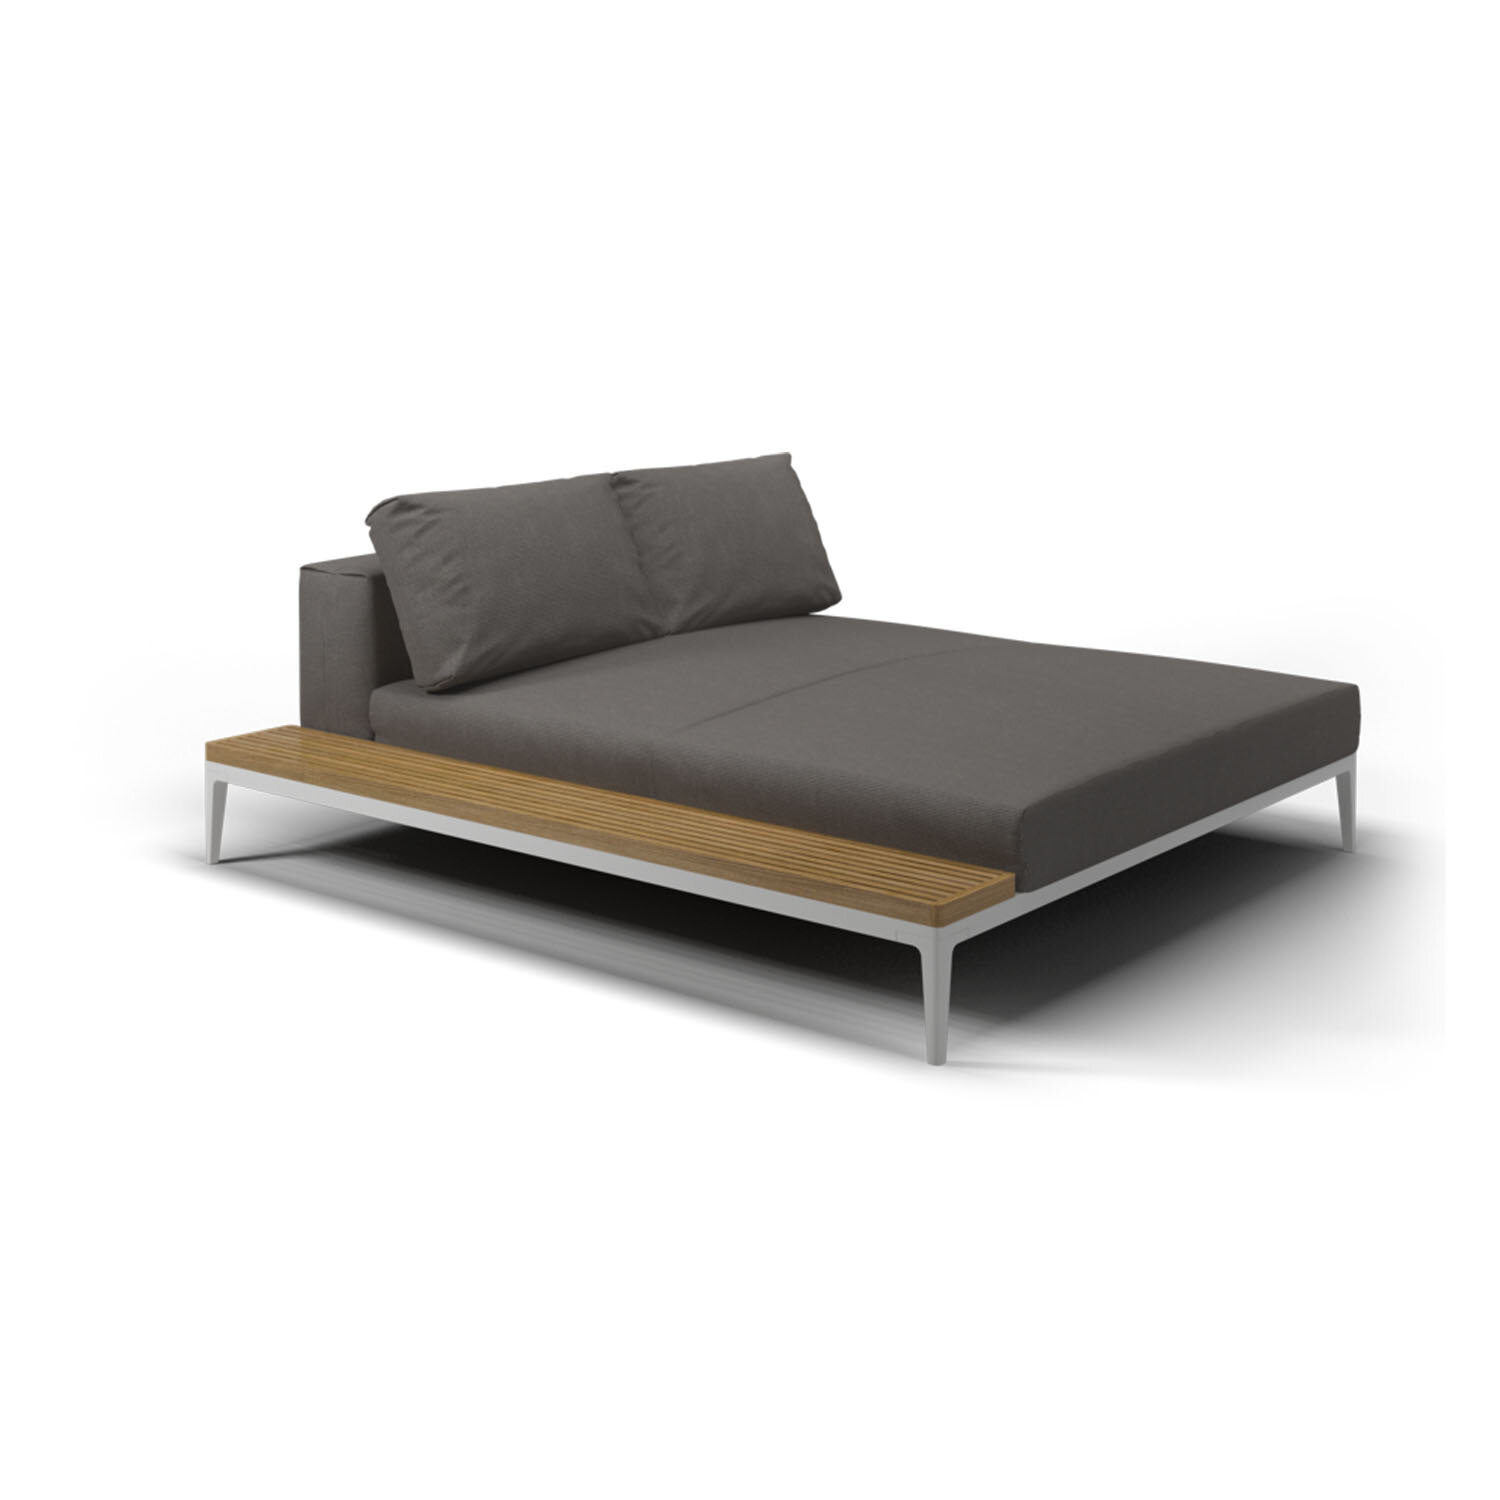 GRID_LEFT-RIGHT_CHILL_CHAISE_UNIT 1.jpg